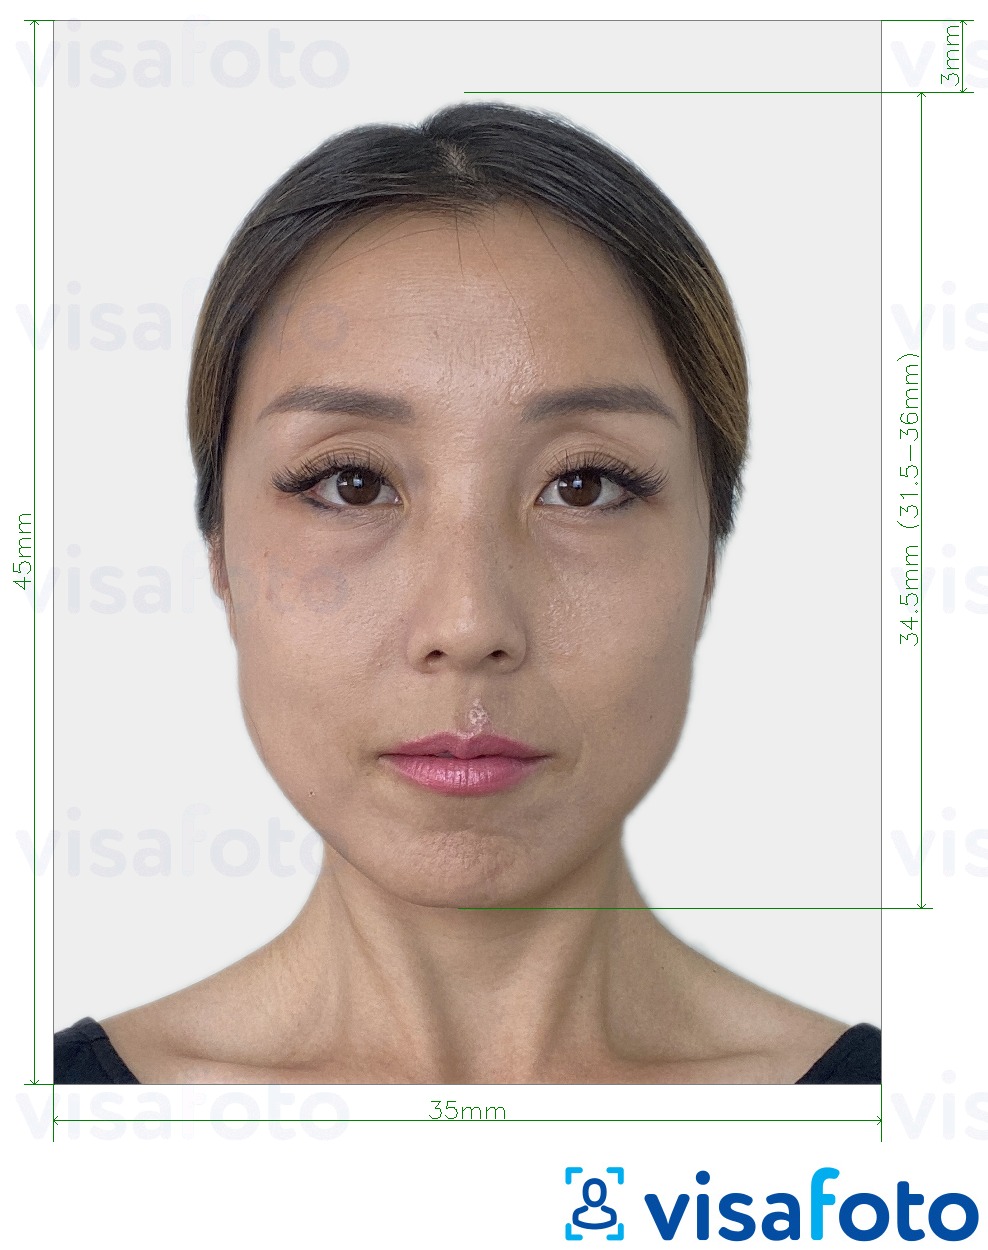 Example of photo for South Korea passport 35x45 mm (3.5x4.5 cm) with exact size specification